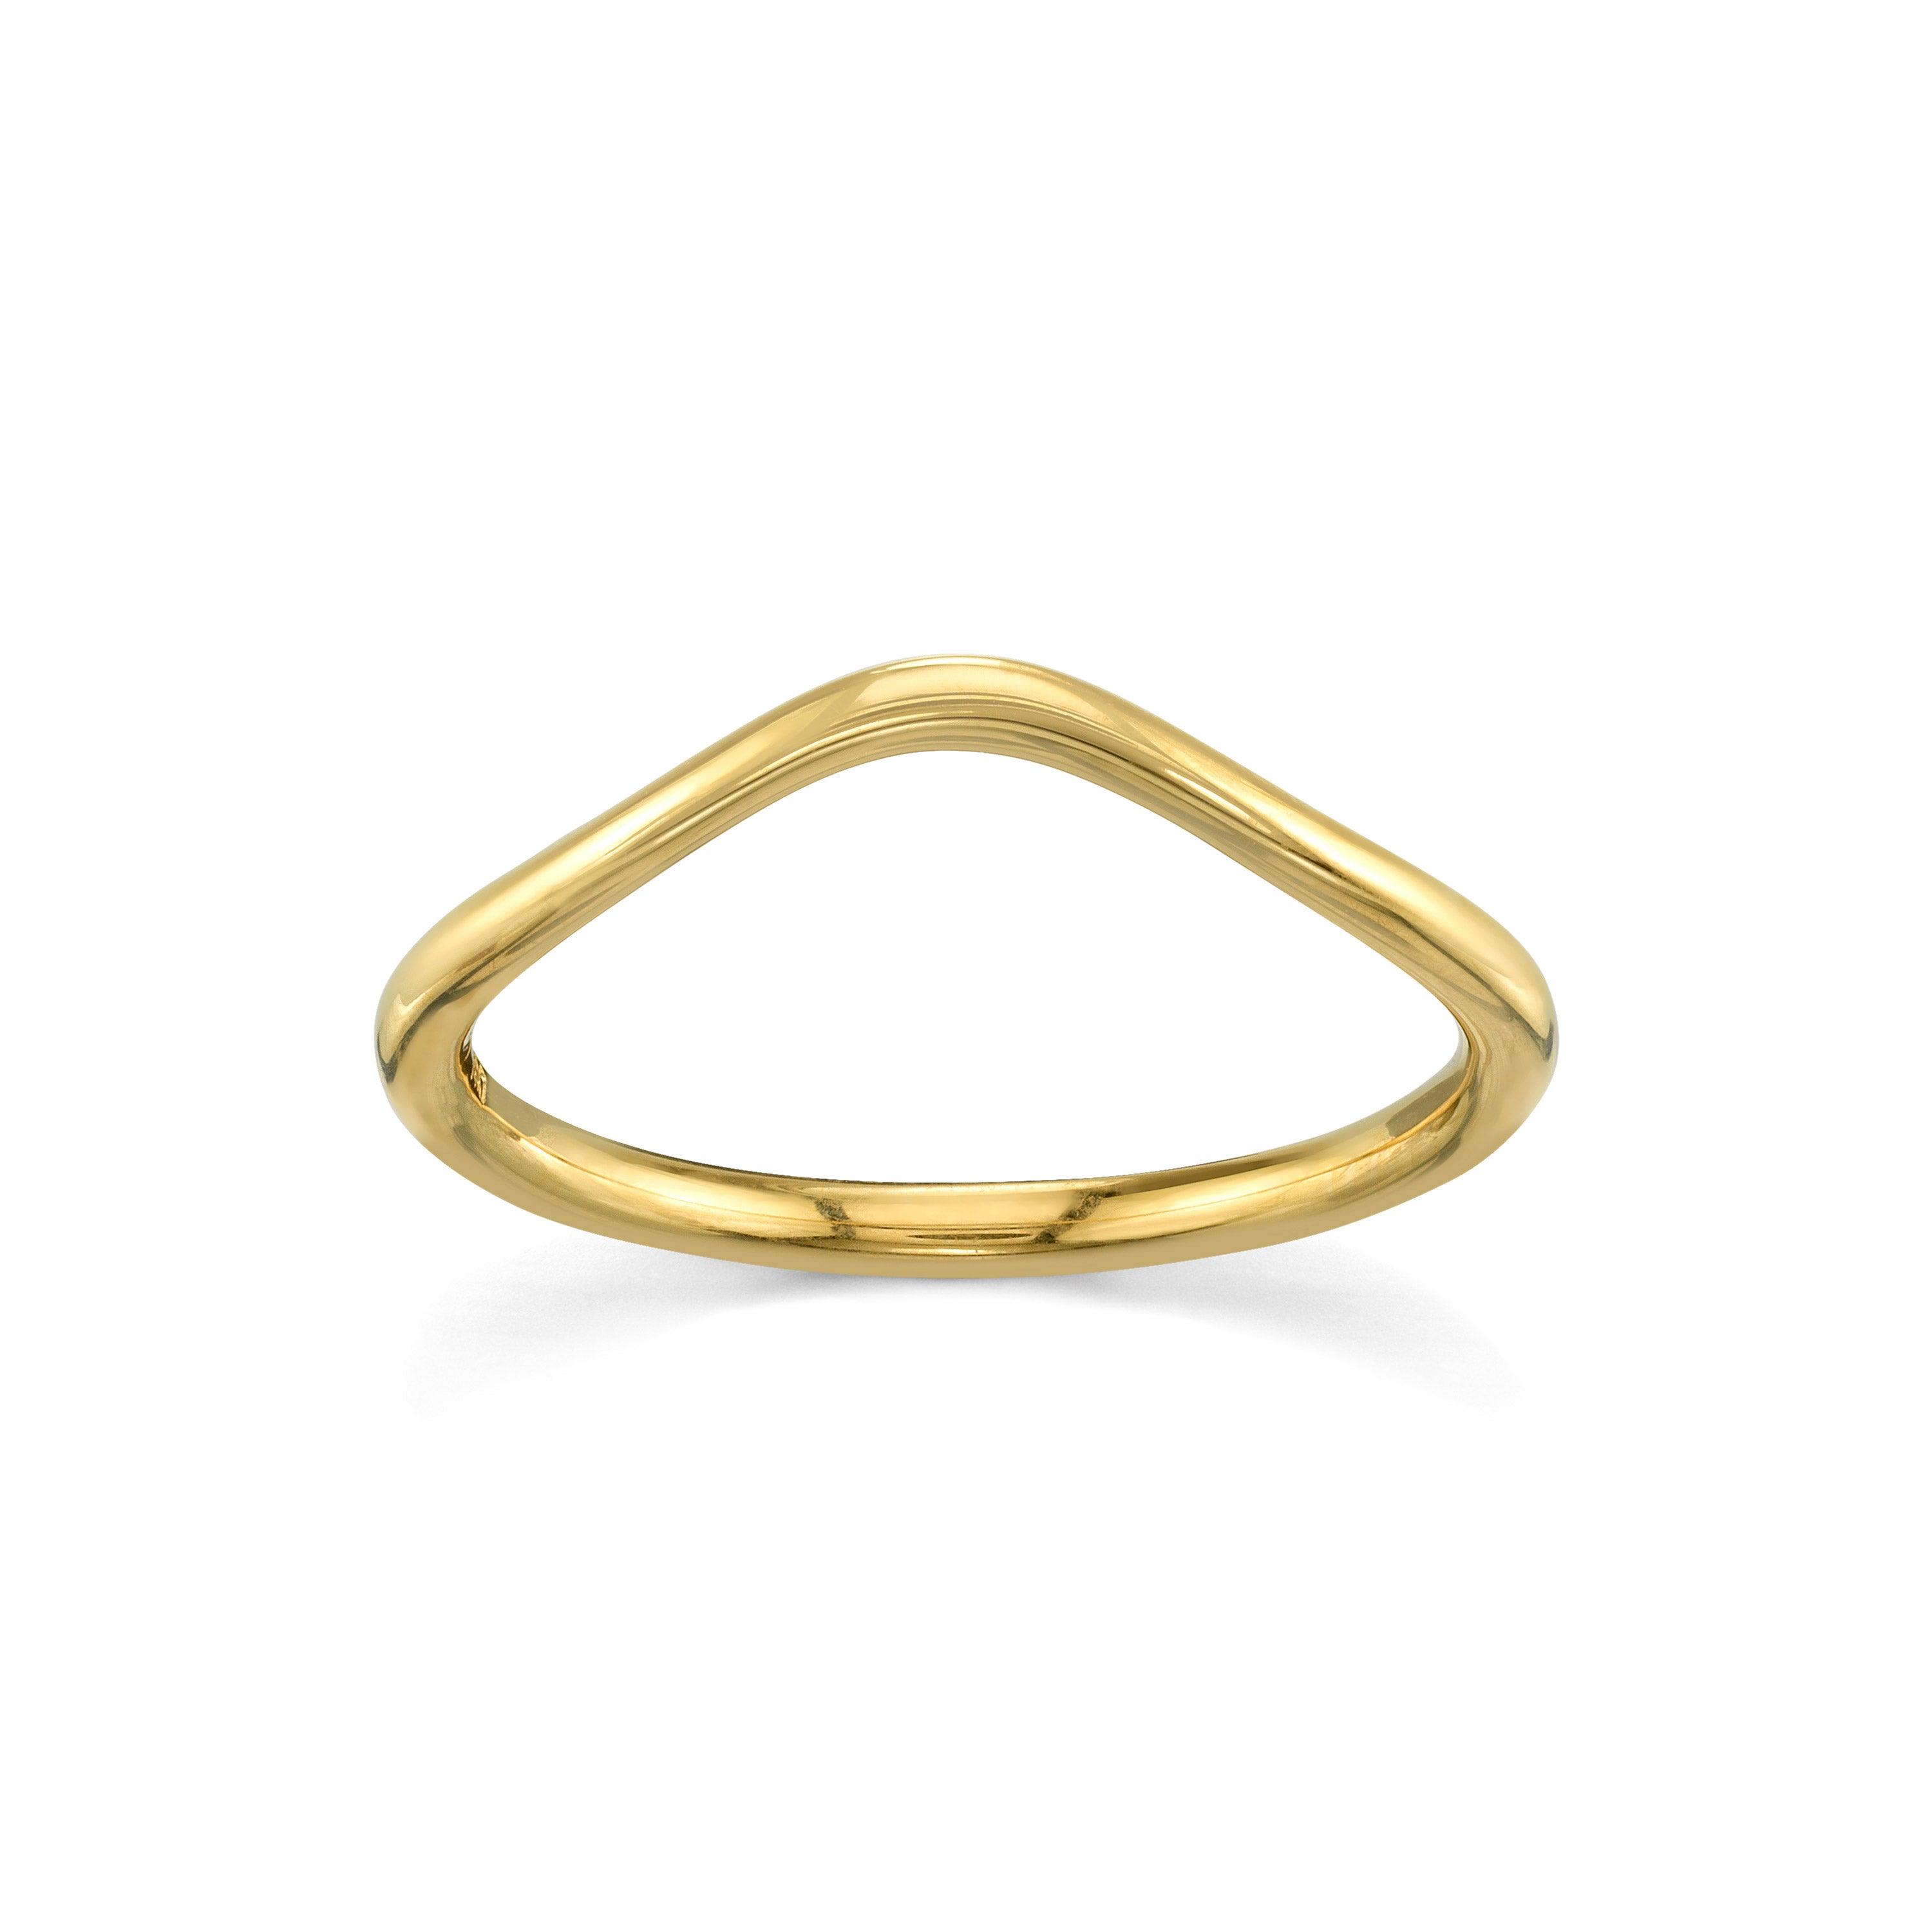 Marrow Fine Jewelry Dainty Everyday Wave Shaped Stacking Band Ring